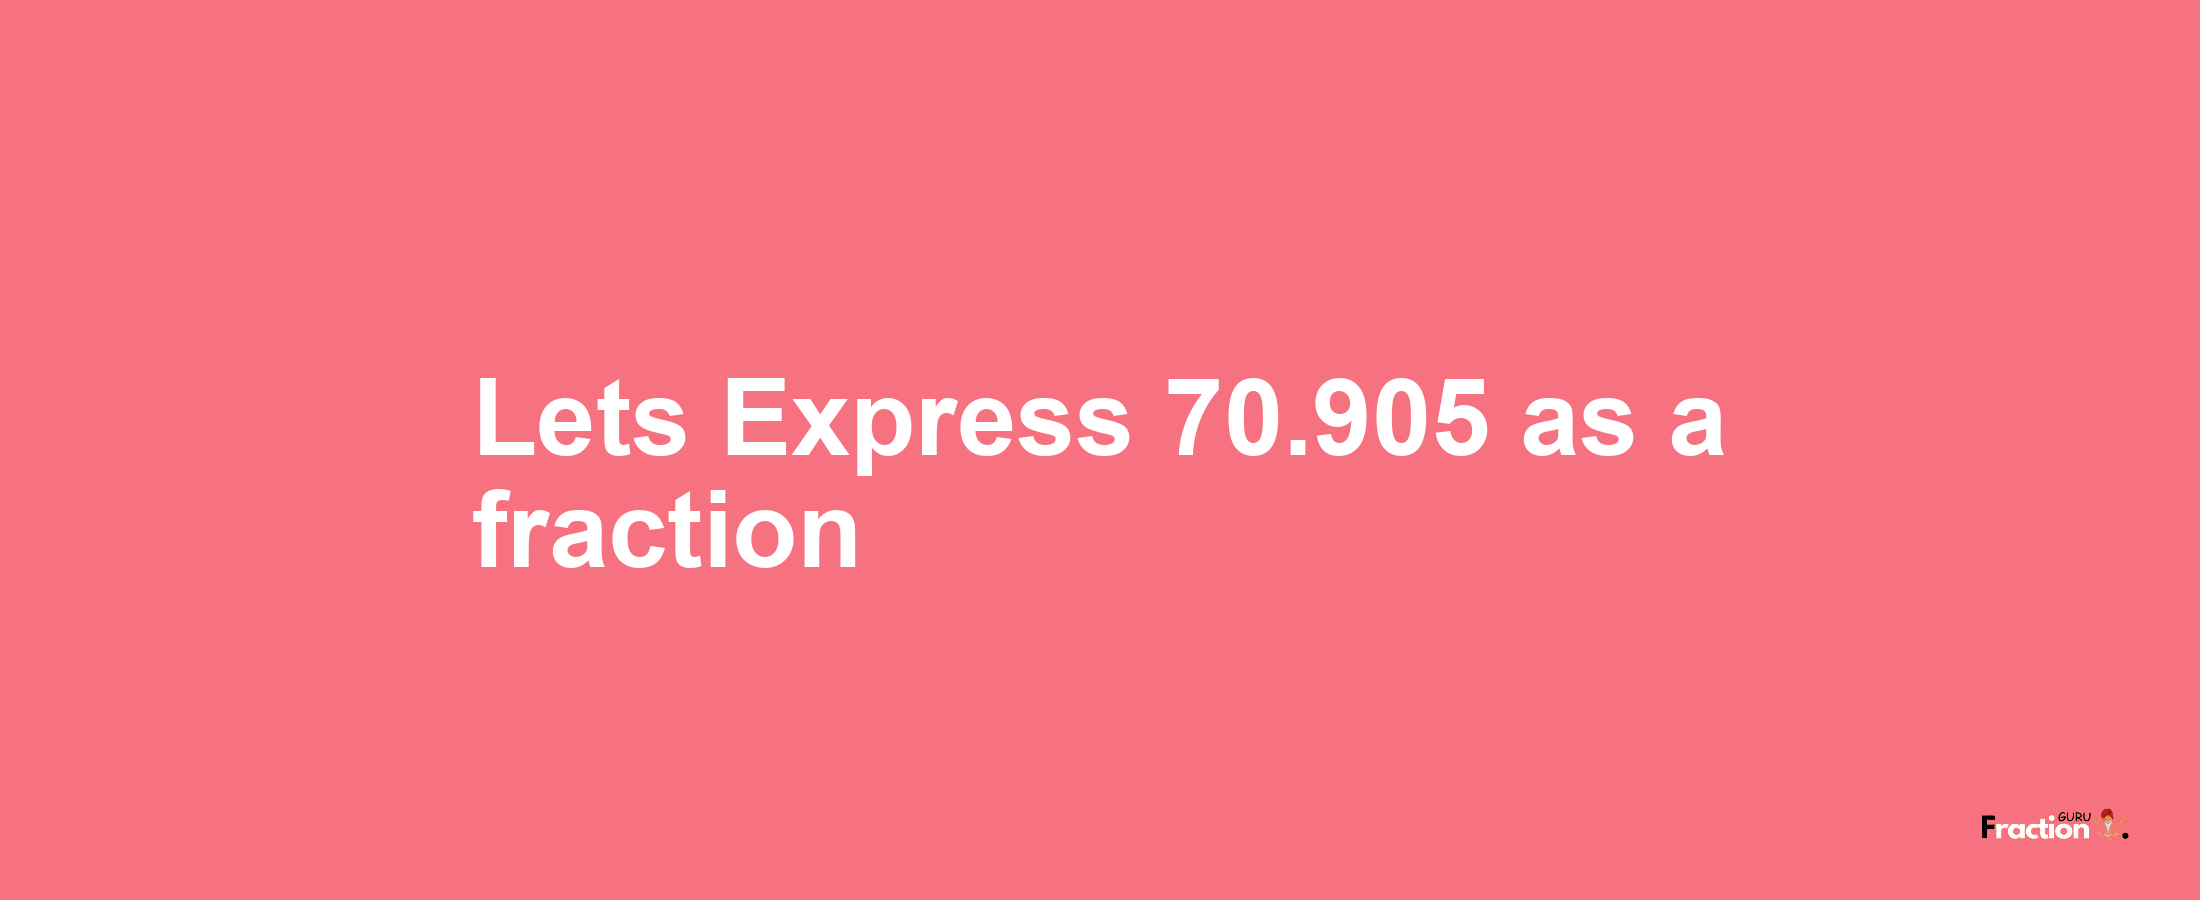 Lets Express 70.905 as afraction